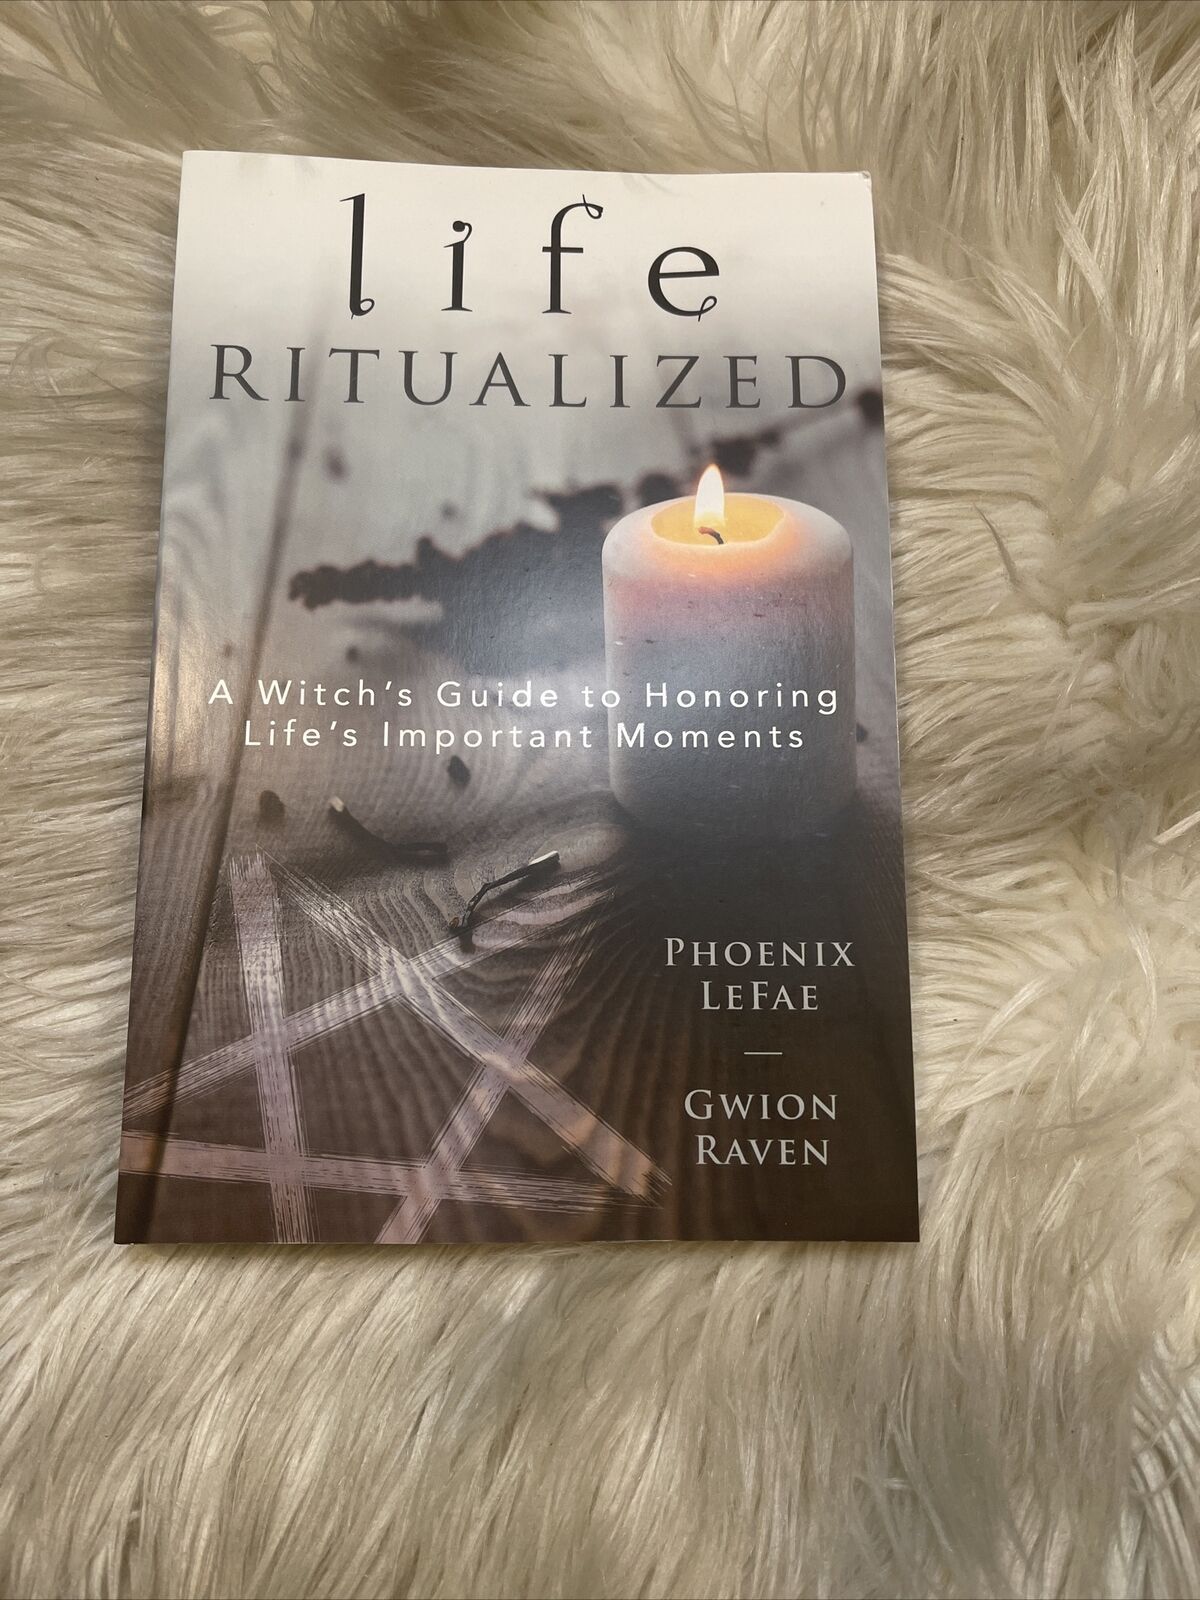 Life Ritualized: A Witch's Guide To Honoring Life's Important Moments